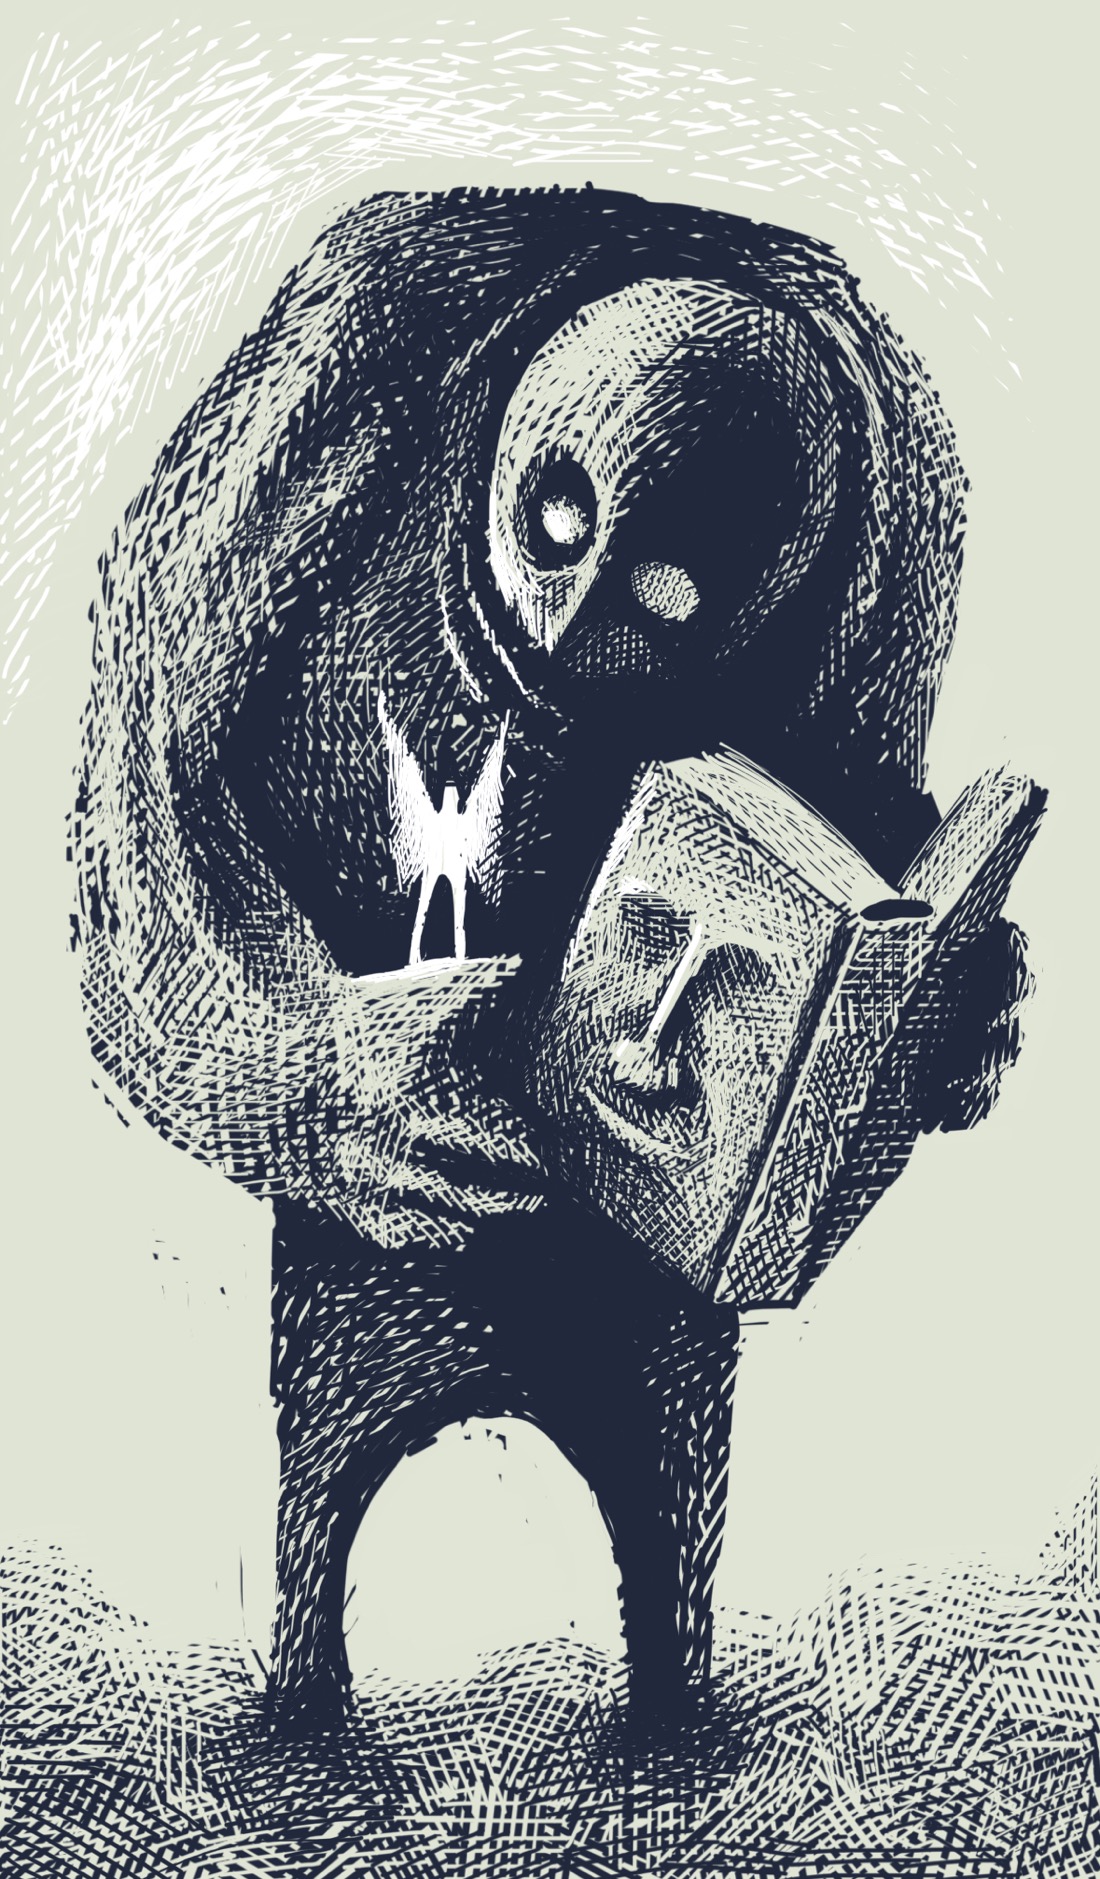 A hulking figure whose head is either very smooth or encased in a helmet stands, holding a large leather bound volume in one hand. A small glowing figure with wings is standing on its other hand. The figure is looking at it. The rear cover of the volume has a vague, expressionless face molded into it.